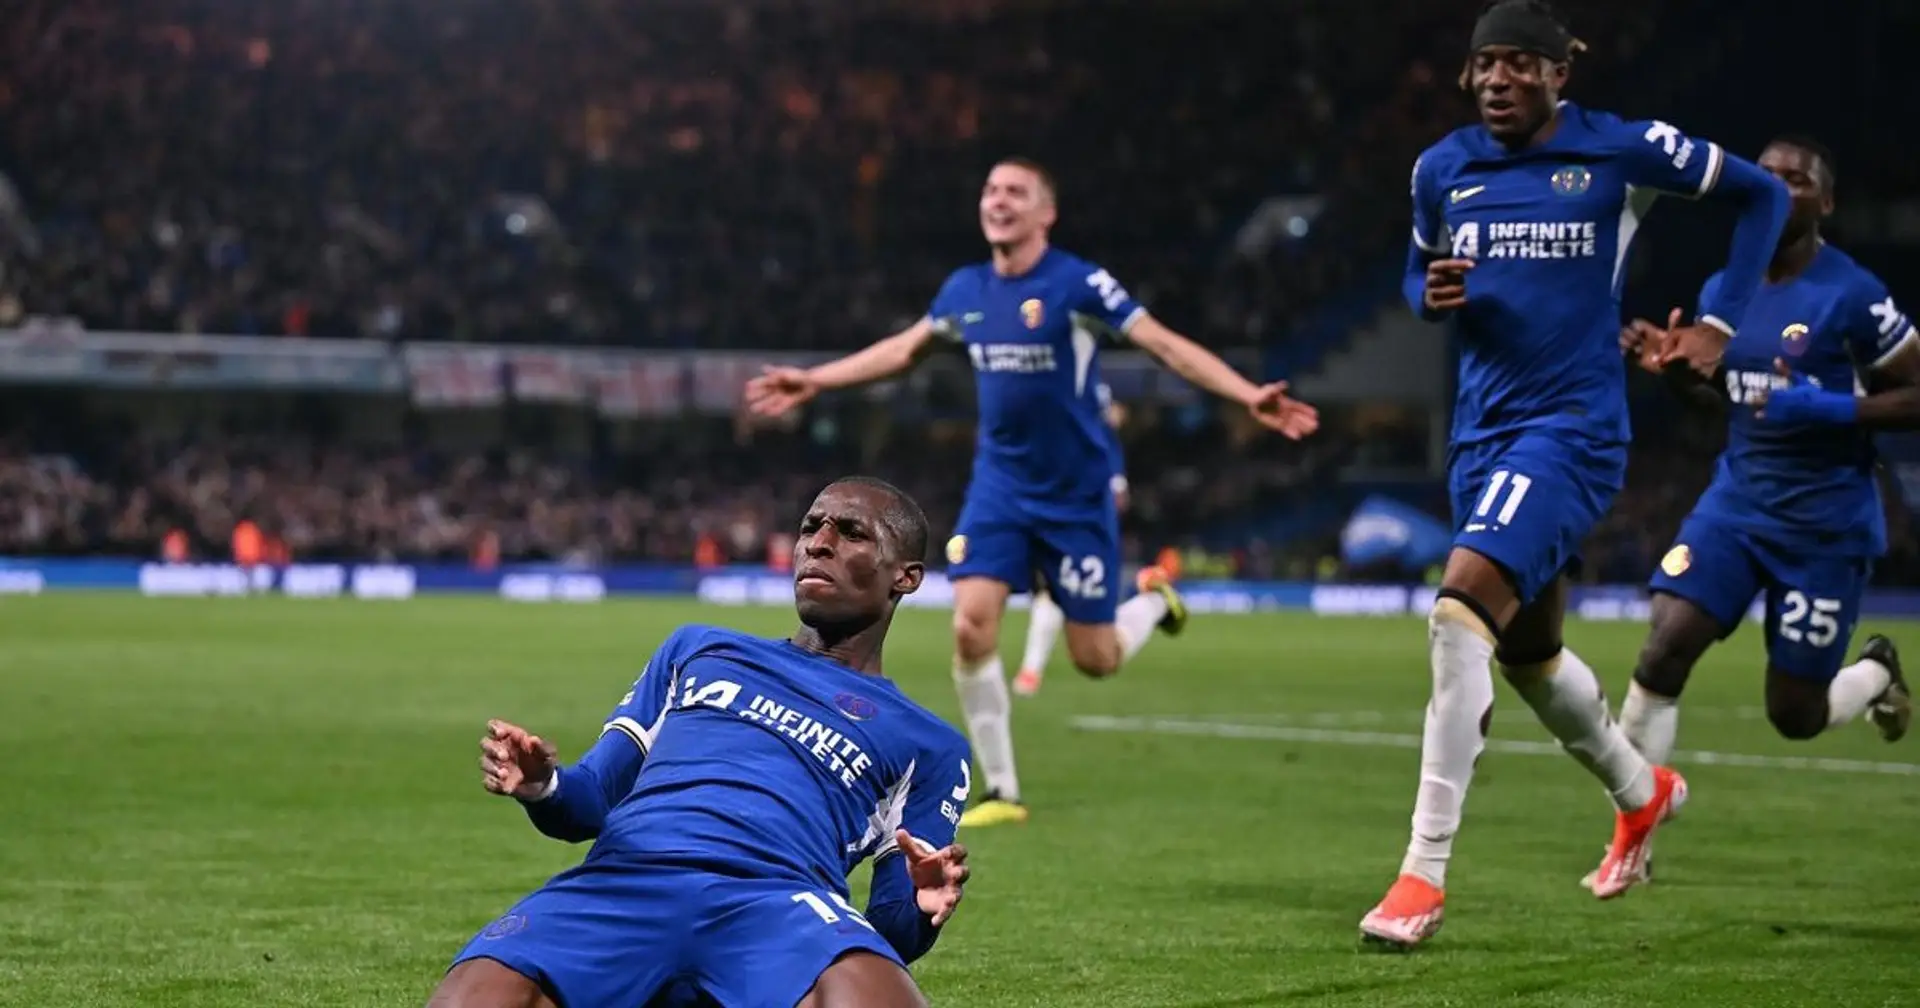 'Two clean sheets and seven goals against tough opponents': Madueke opens up on Chelsea turnaround